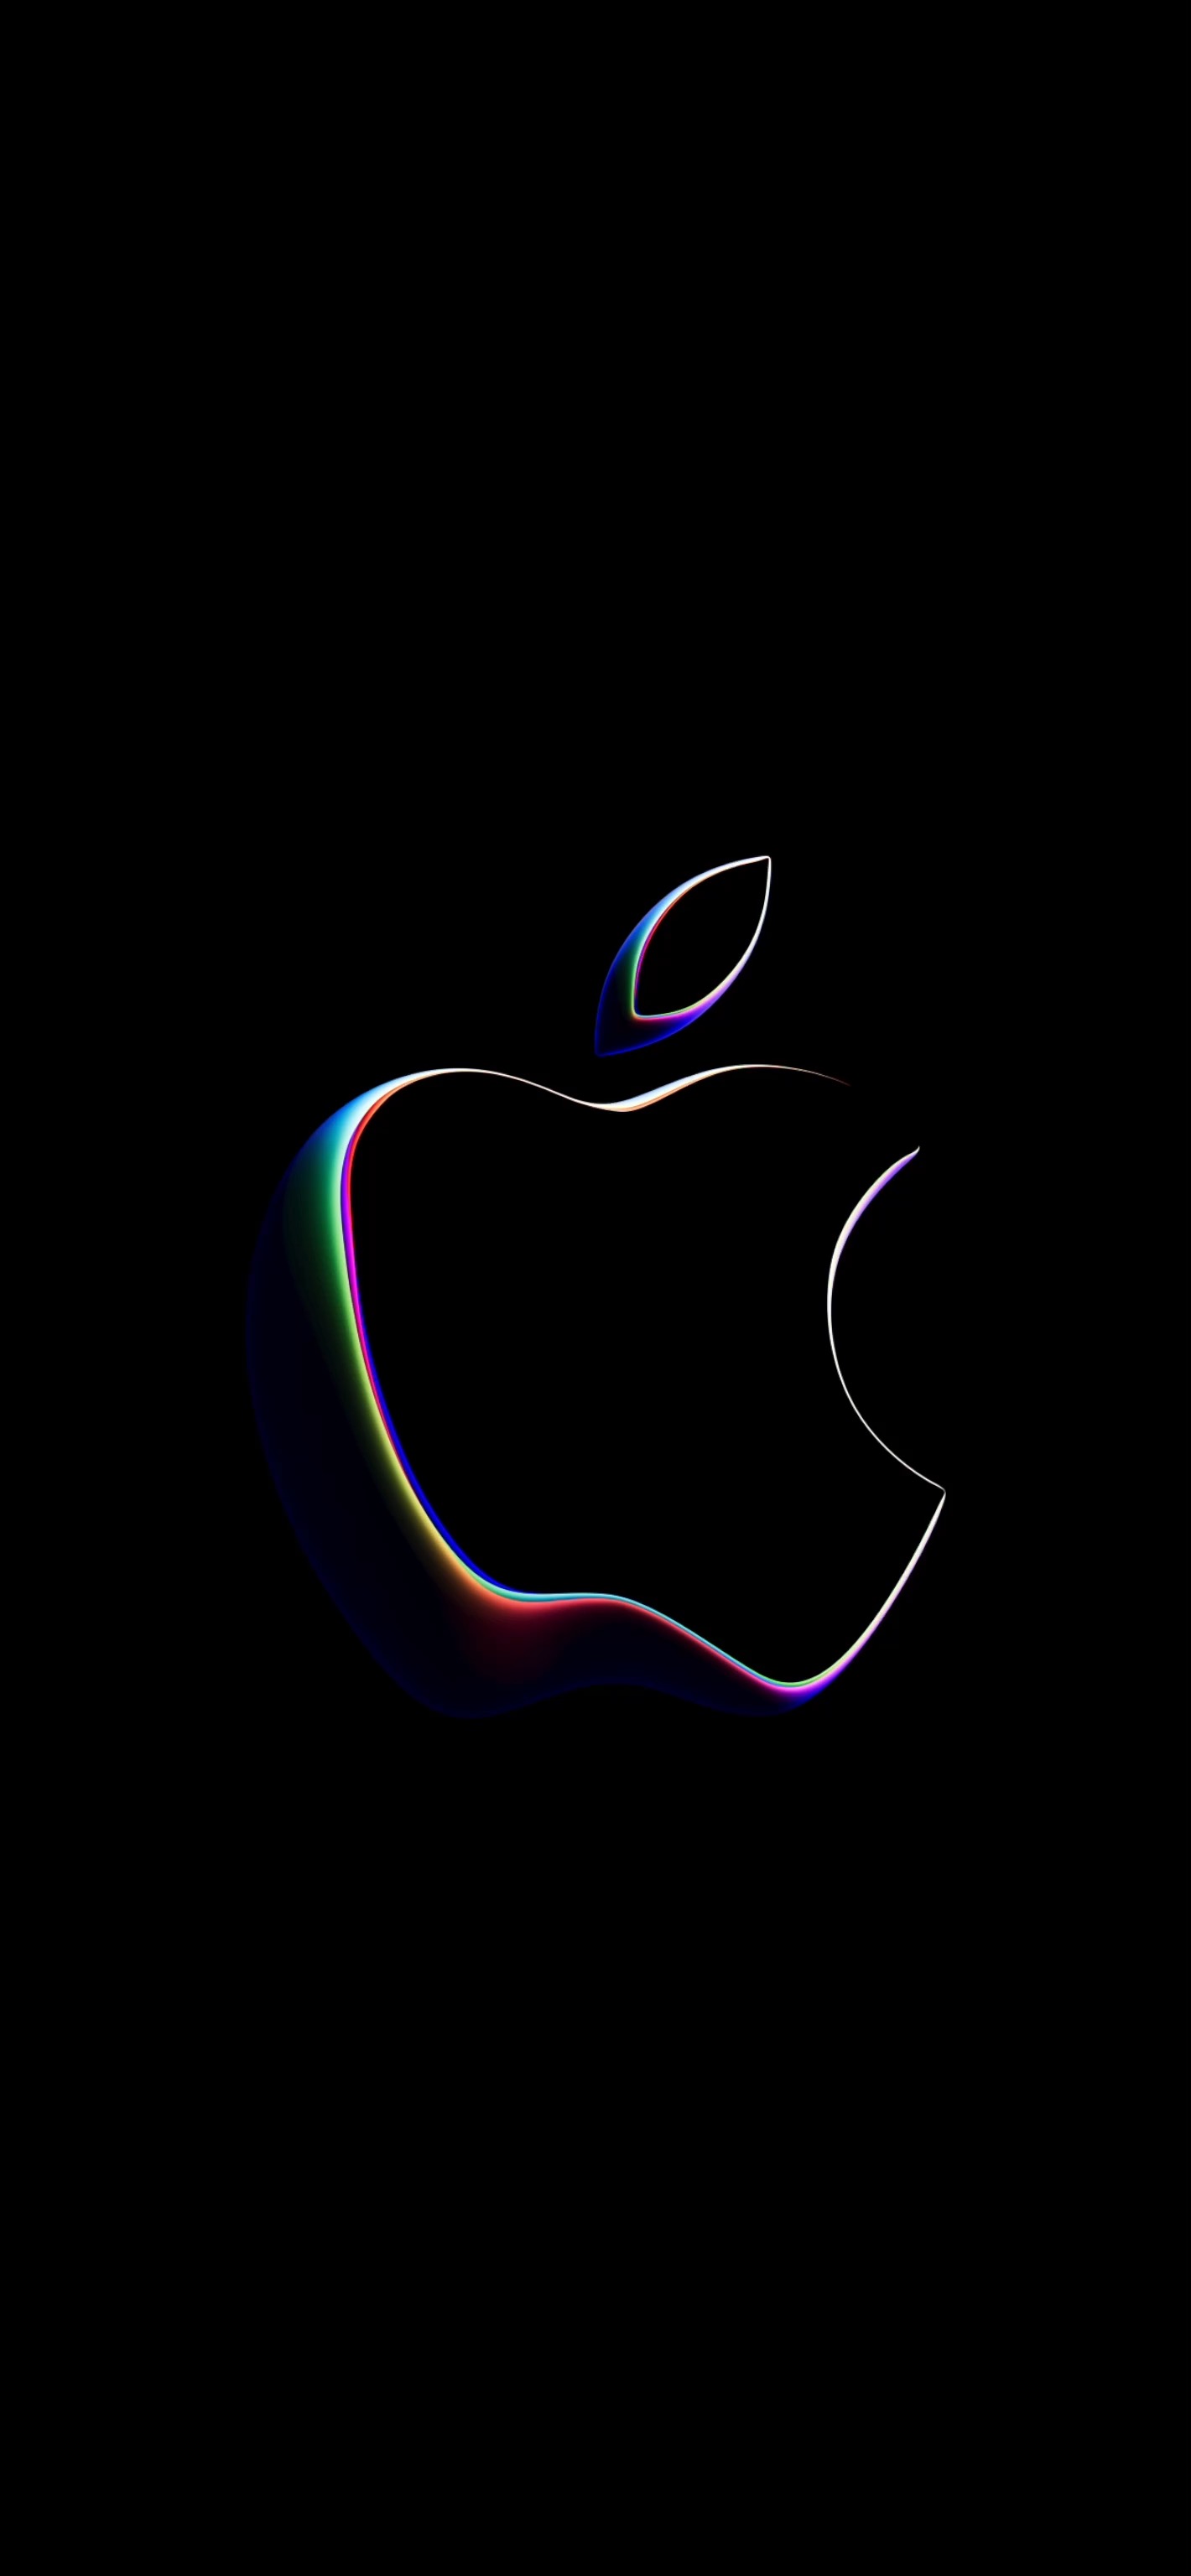 Apple turns its gorgeous new logo design into wallpaper for your iPhone and  Mac  Macworld